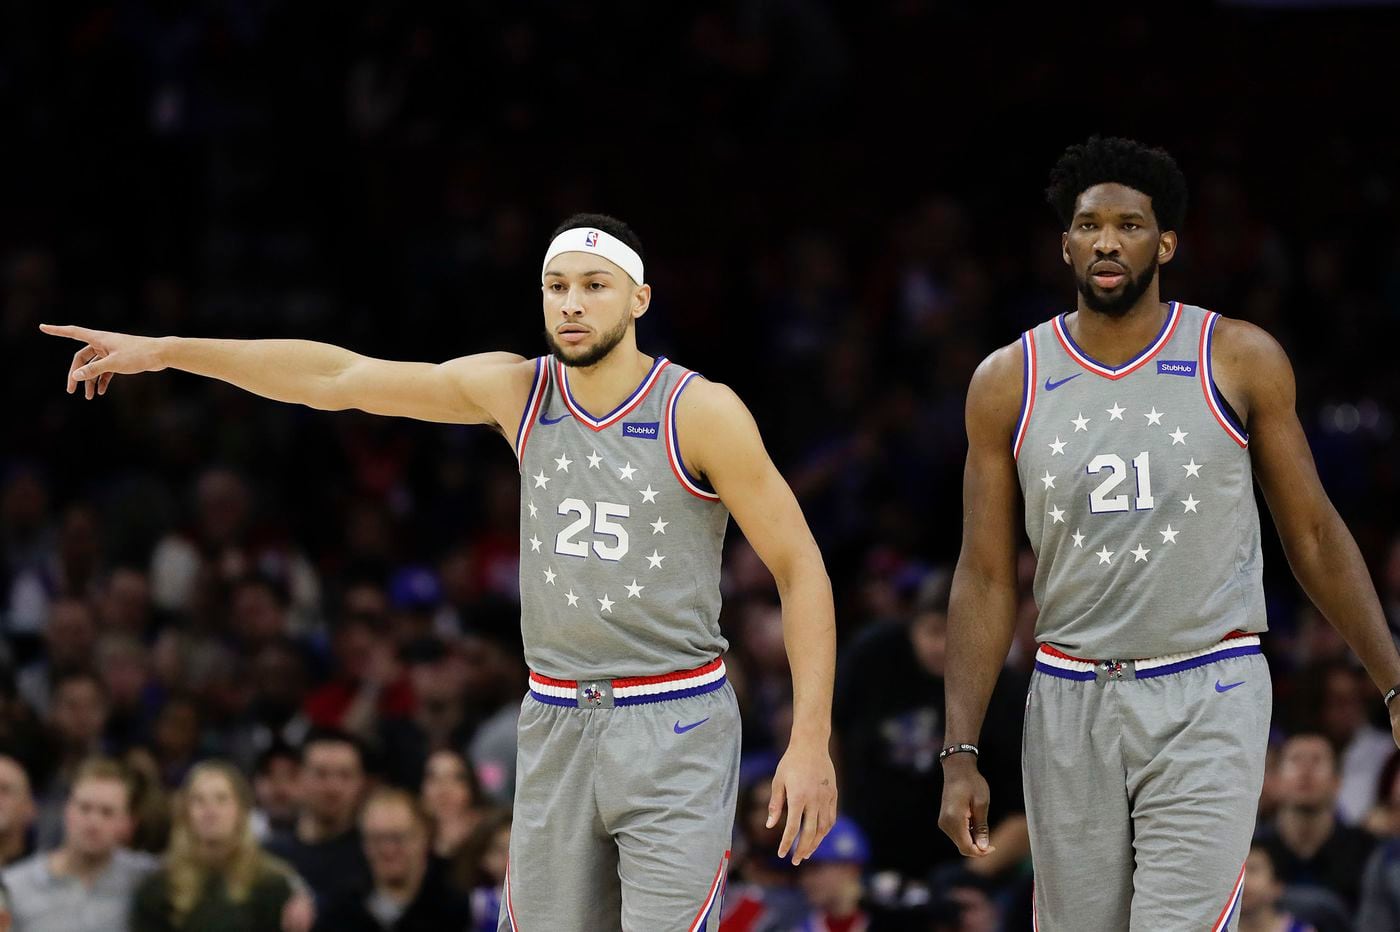 Sixers Receive Earned Edition Uniforms In Honor Of Playoff Appearance